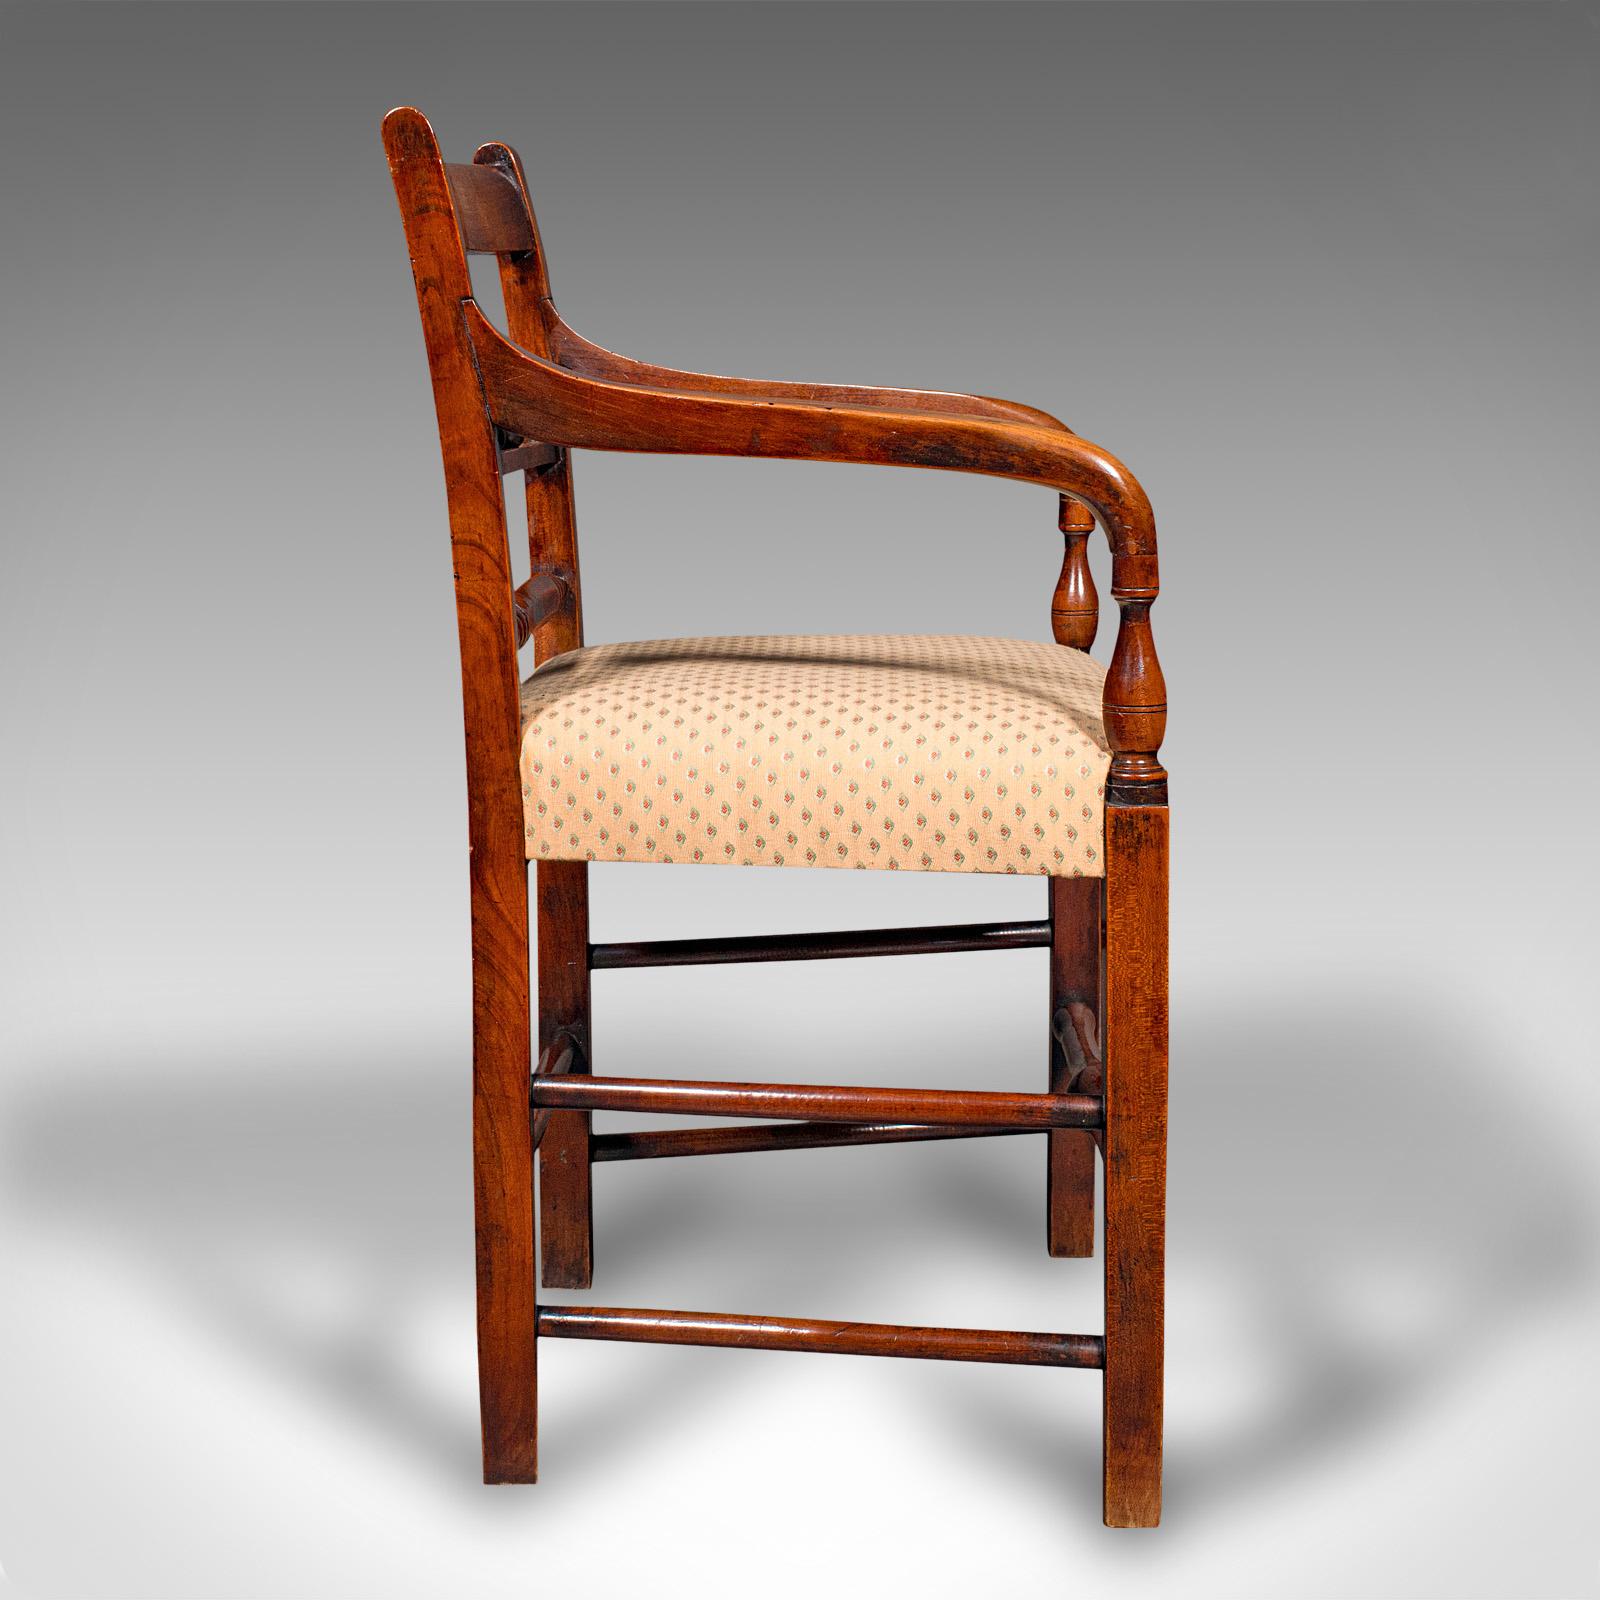 British Antique Elbow Chair, English, Fruitwood, Office, Desk Seat, Victorian, C.1870 For Sale